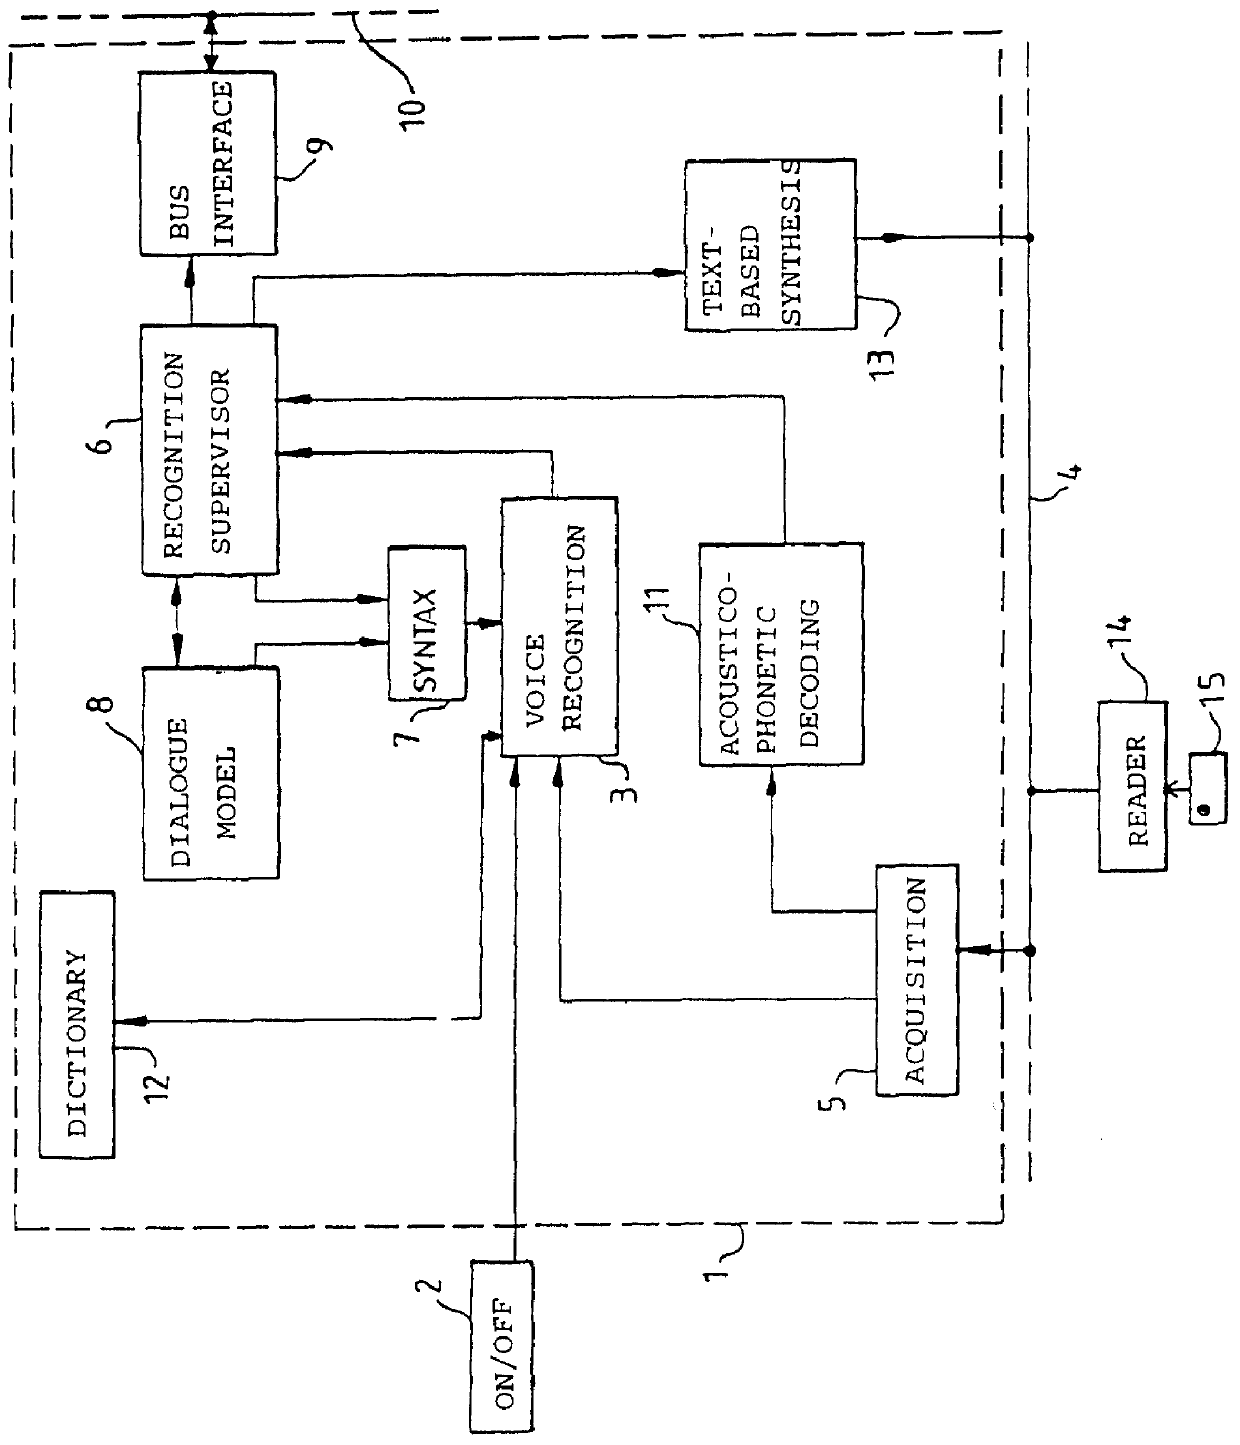 Process of voice recognition in a harsh environment, and device for implementation